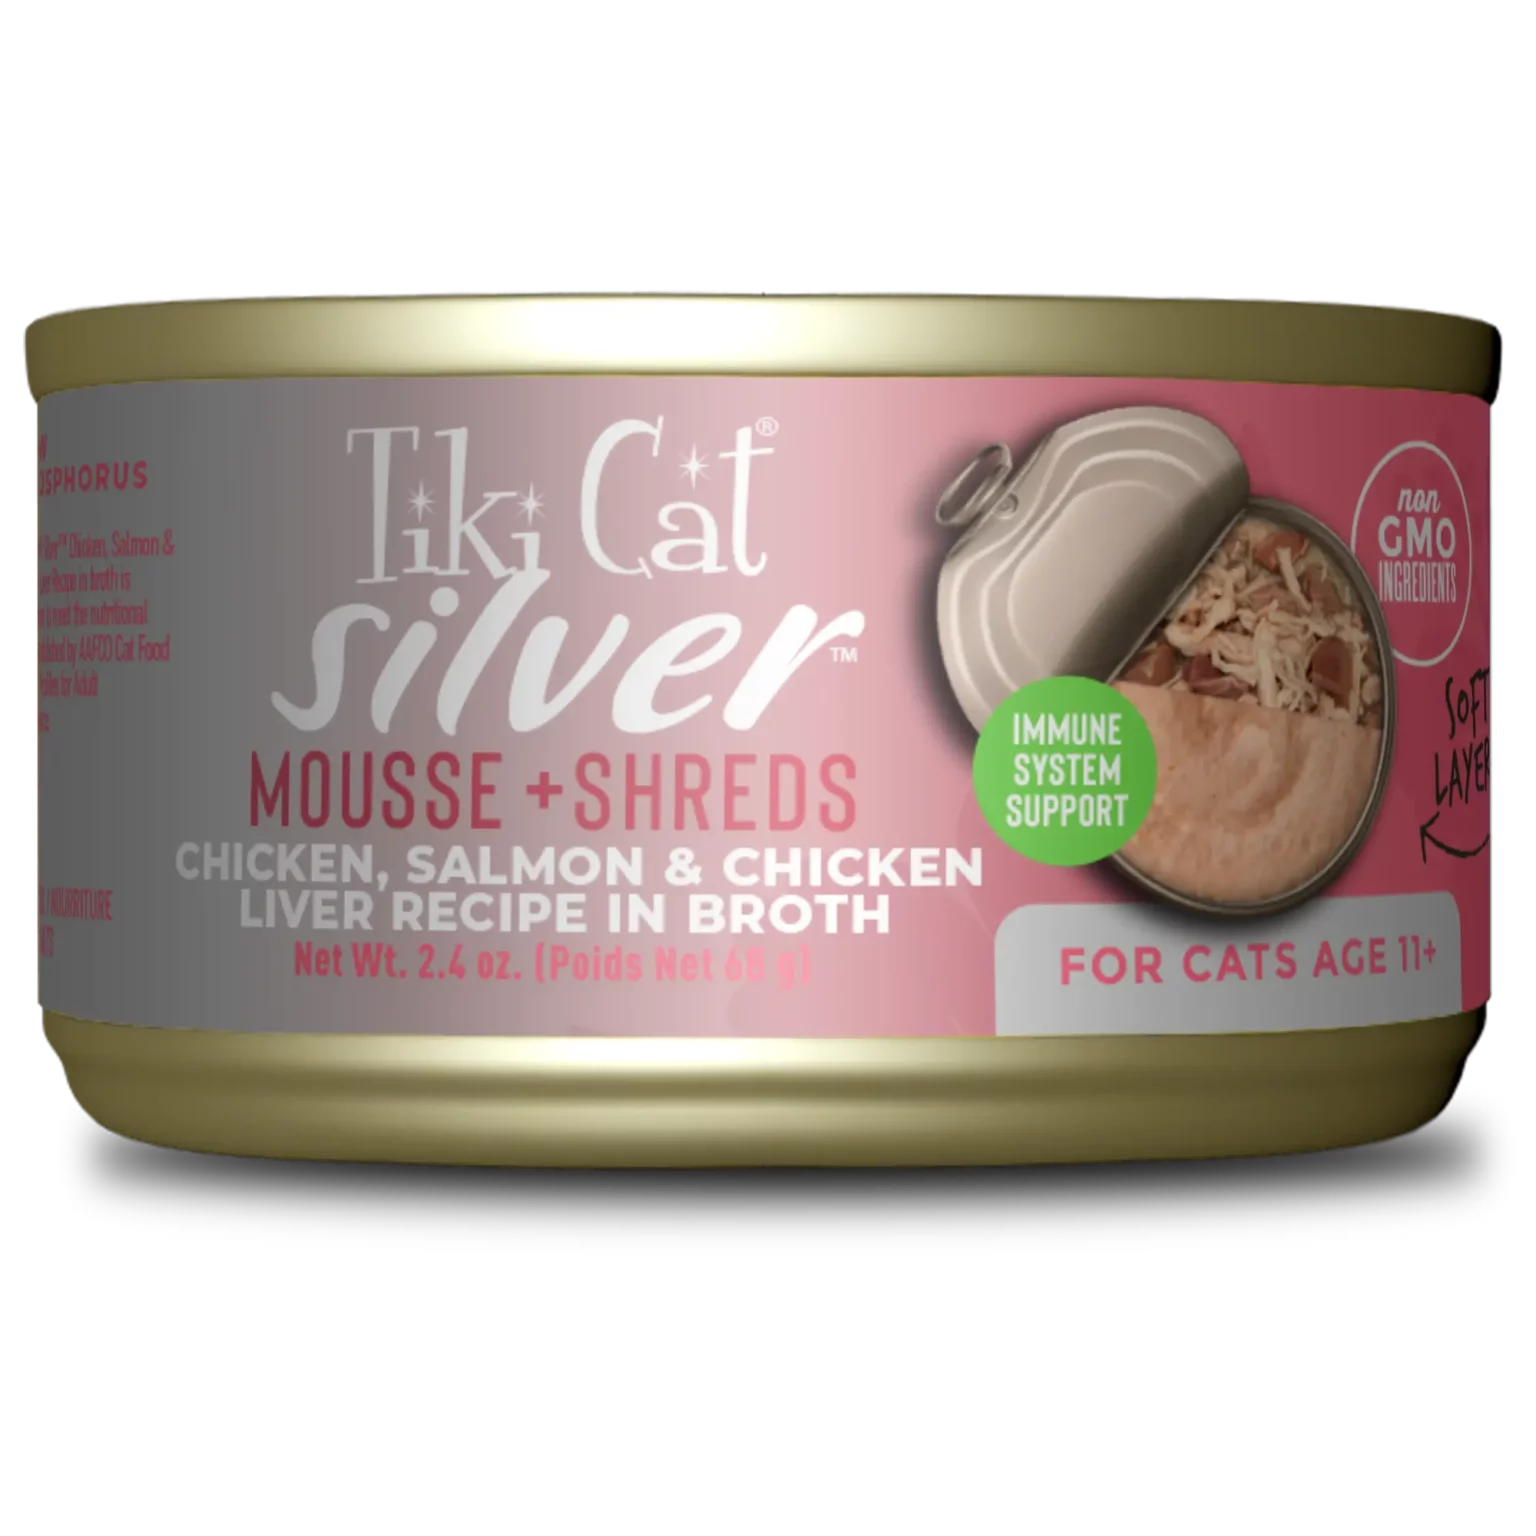 Tiki Cat - Silver - Mousse & Shreds Chicken, Salmon & Chicken Liver Recipe (For Cats)